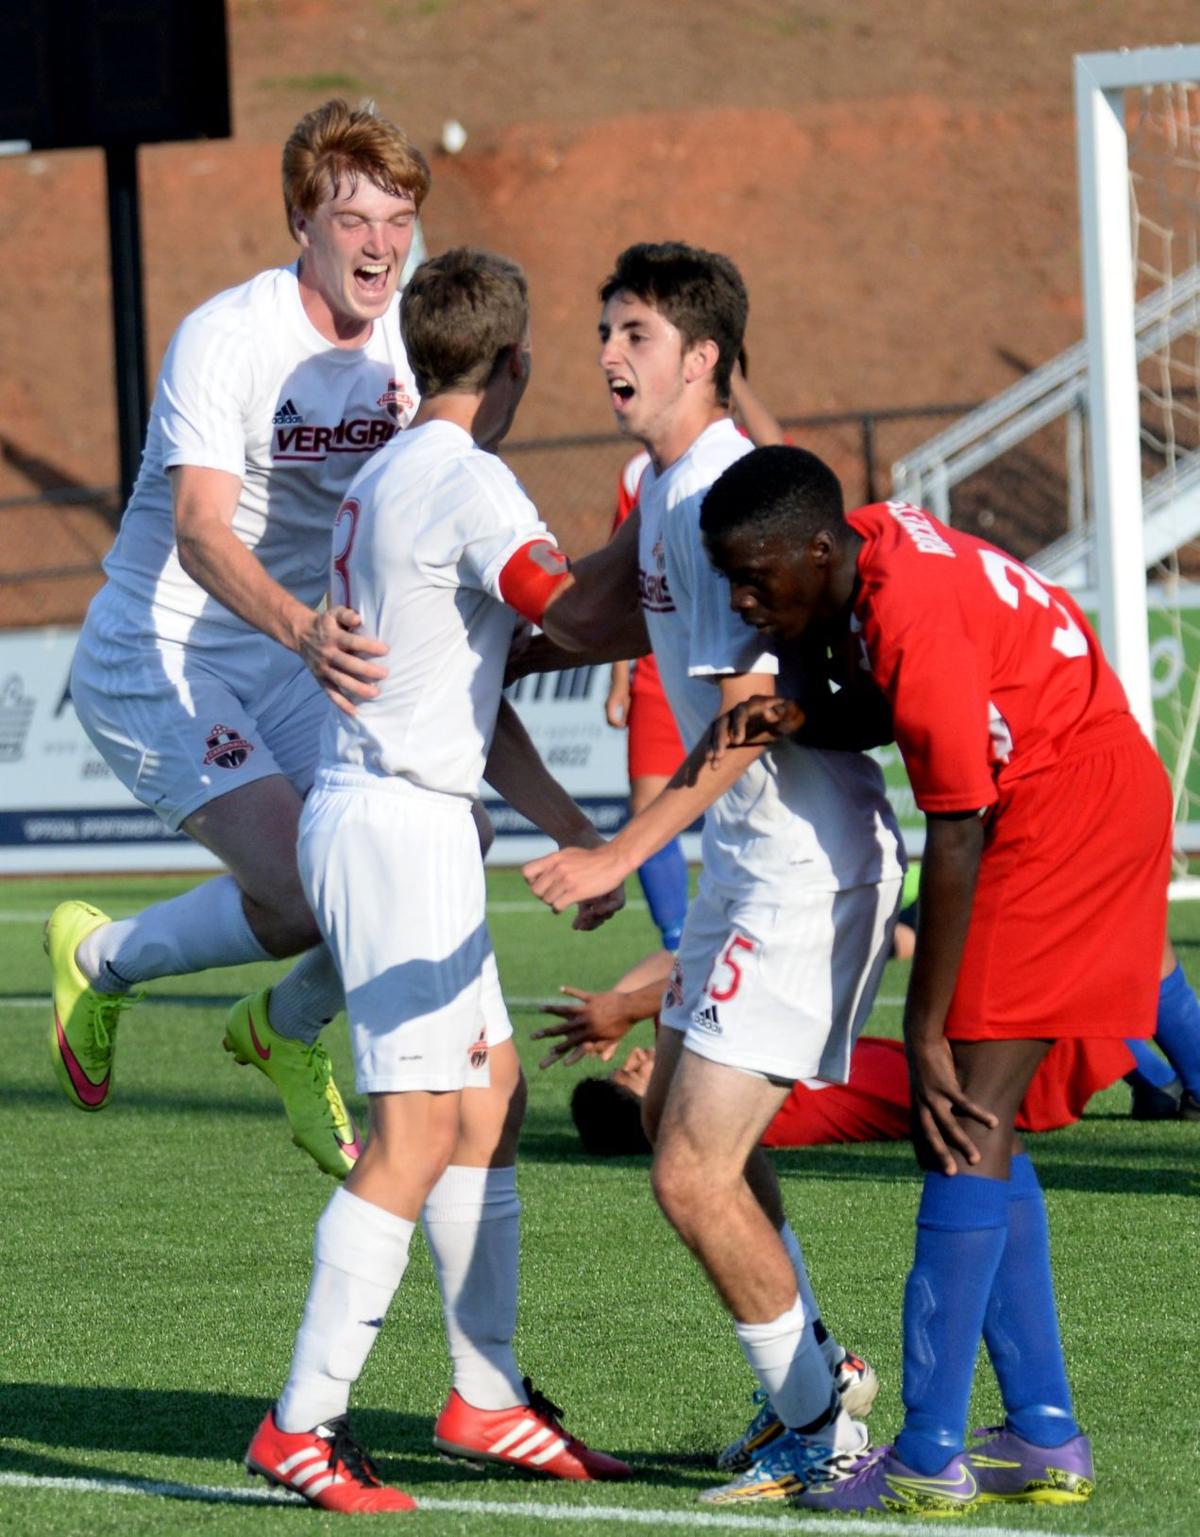 Seniors lead Verdigris to first Class 4 boys state soccer title OK